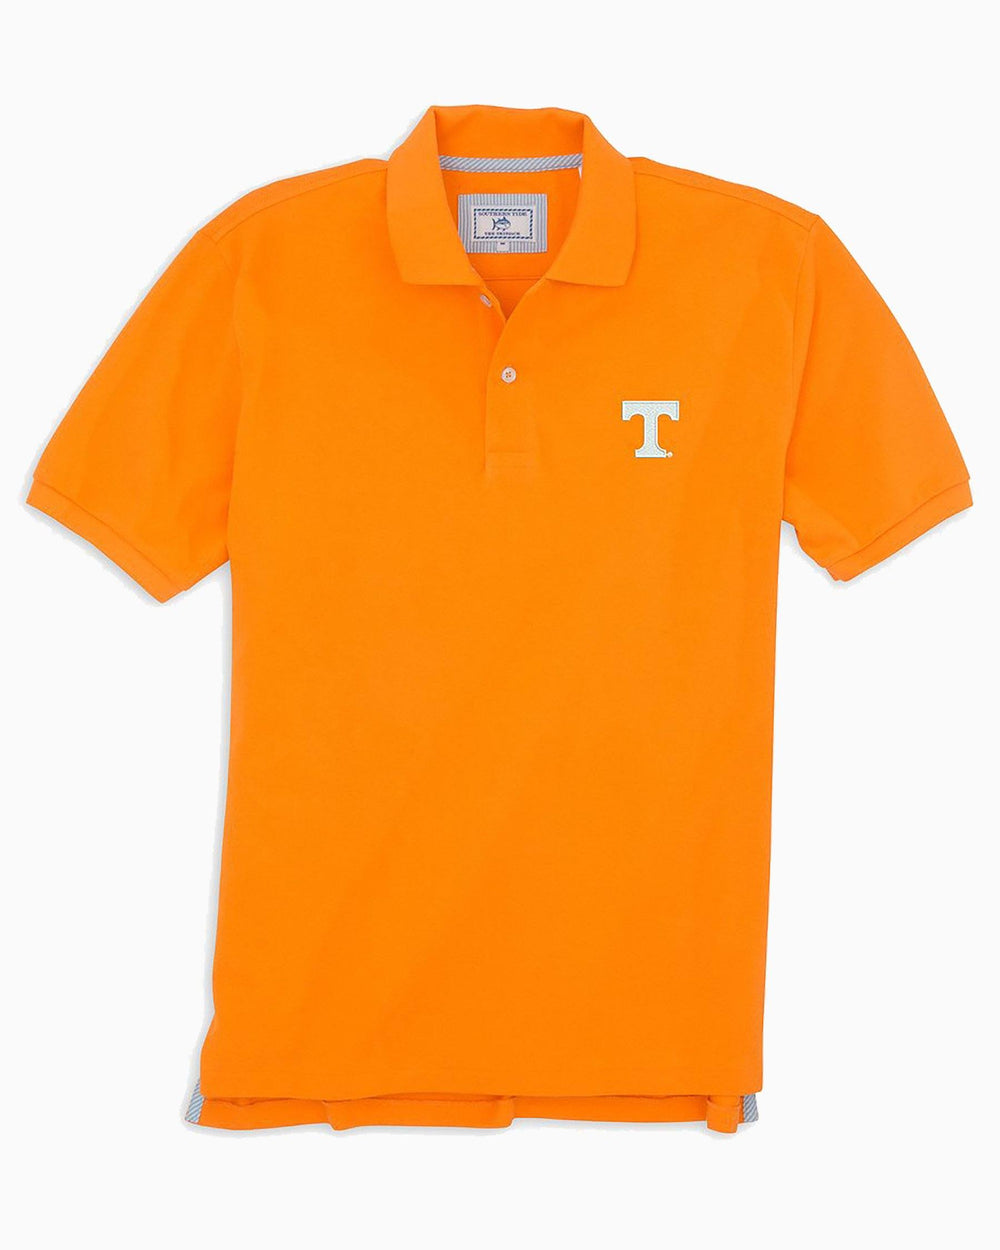 The front view of the Men's Orange Tennessee Vols Pique Polo Shirt by Southern Tide - Rocky Top Orange